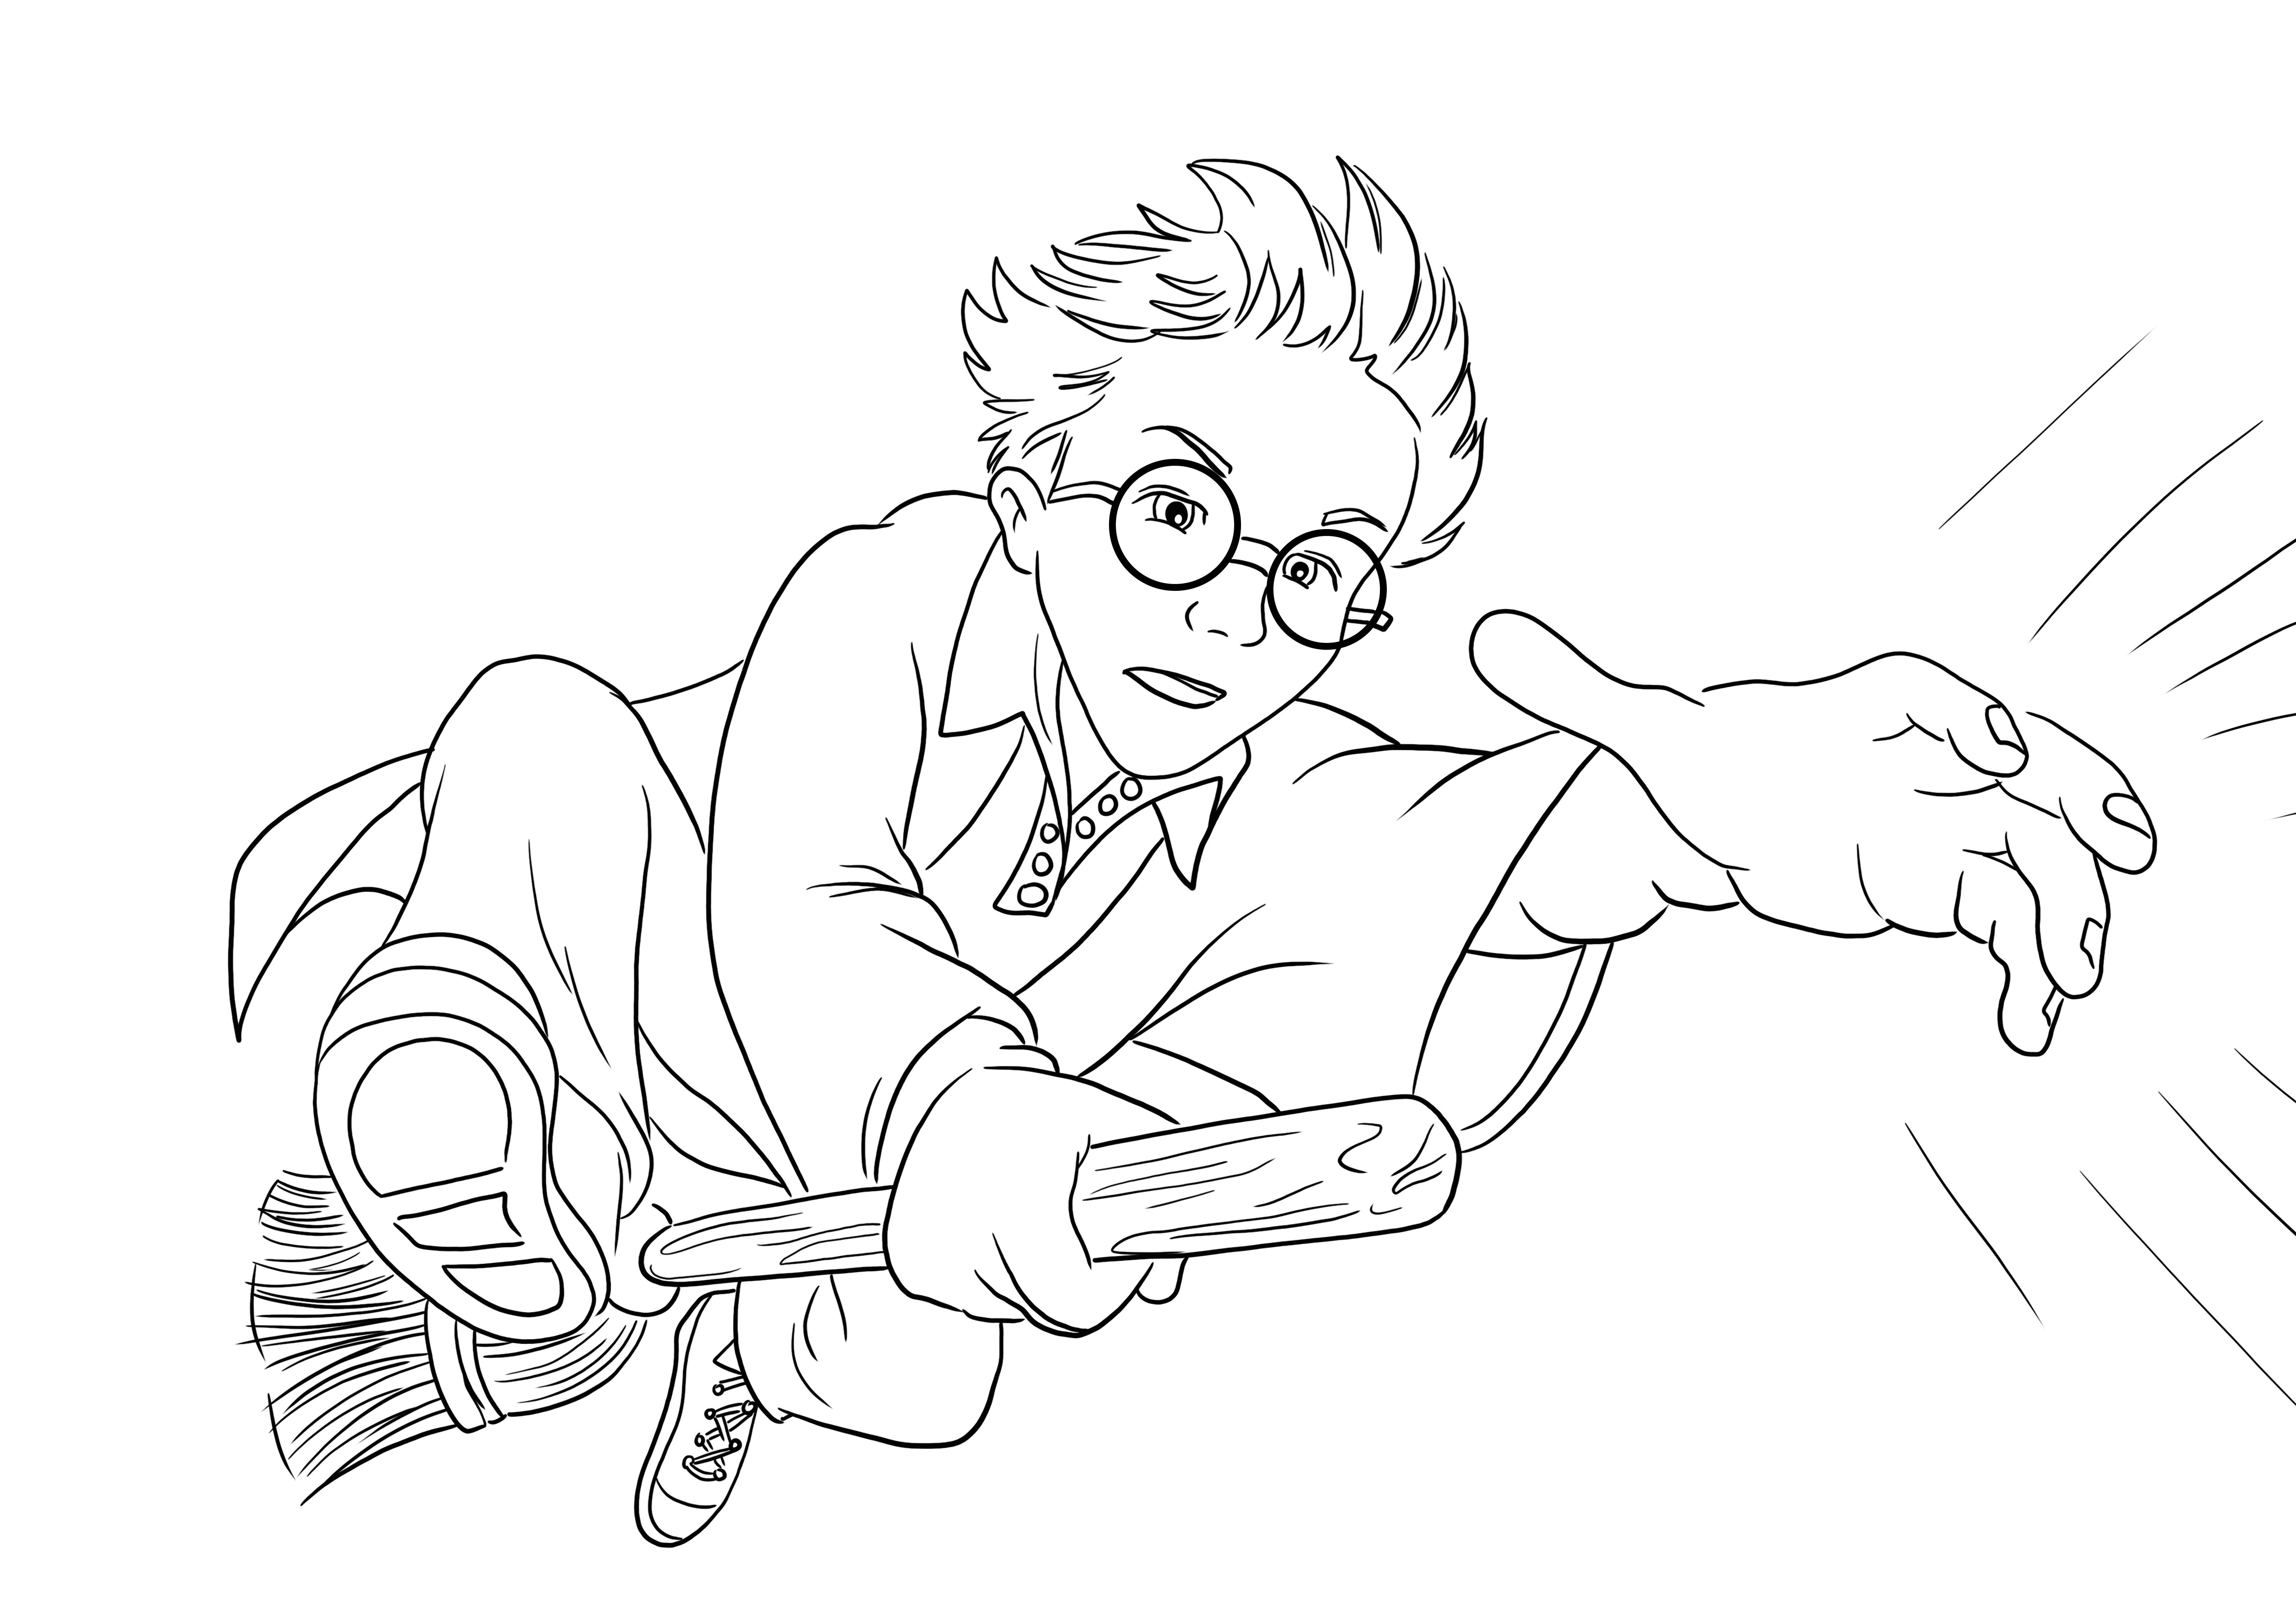 Harry Potter is on a flying broom-free printable ready for coloring for kids